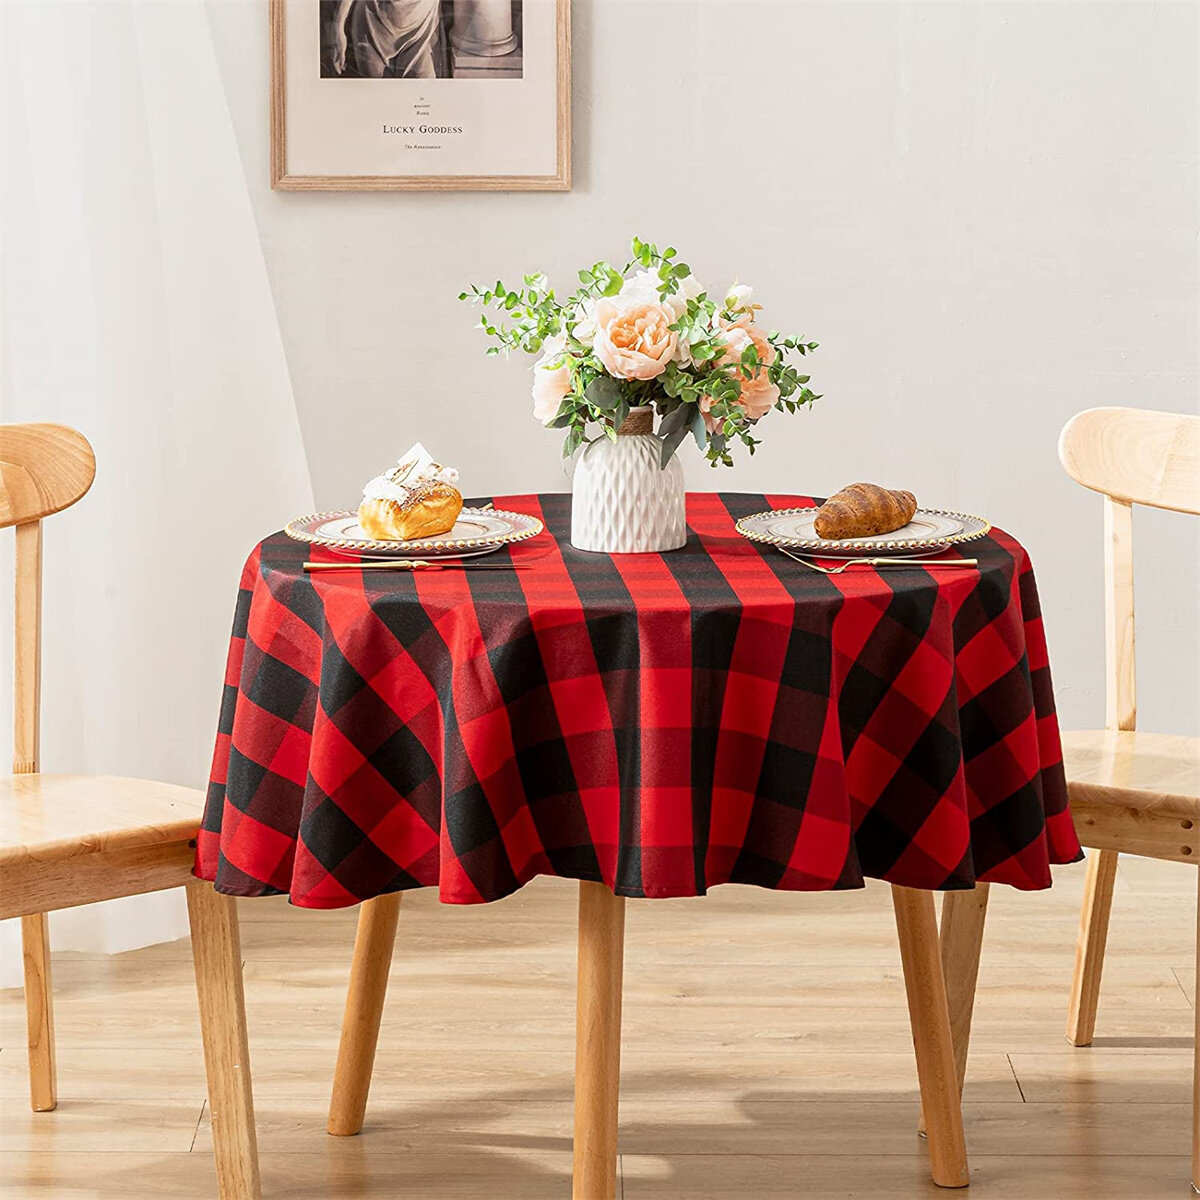 Hiasan Striped Rectangle Tablecloth Stain Resistant Spillproof Banquet Party BLK 